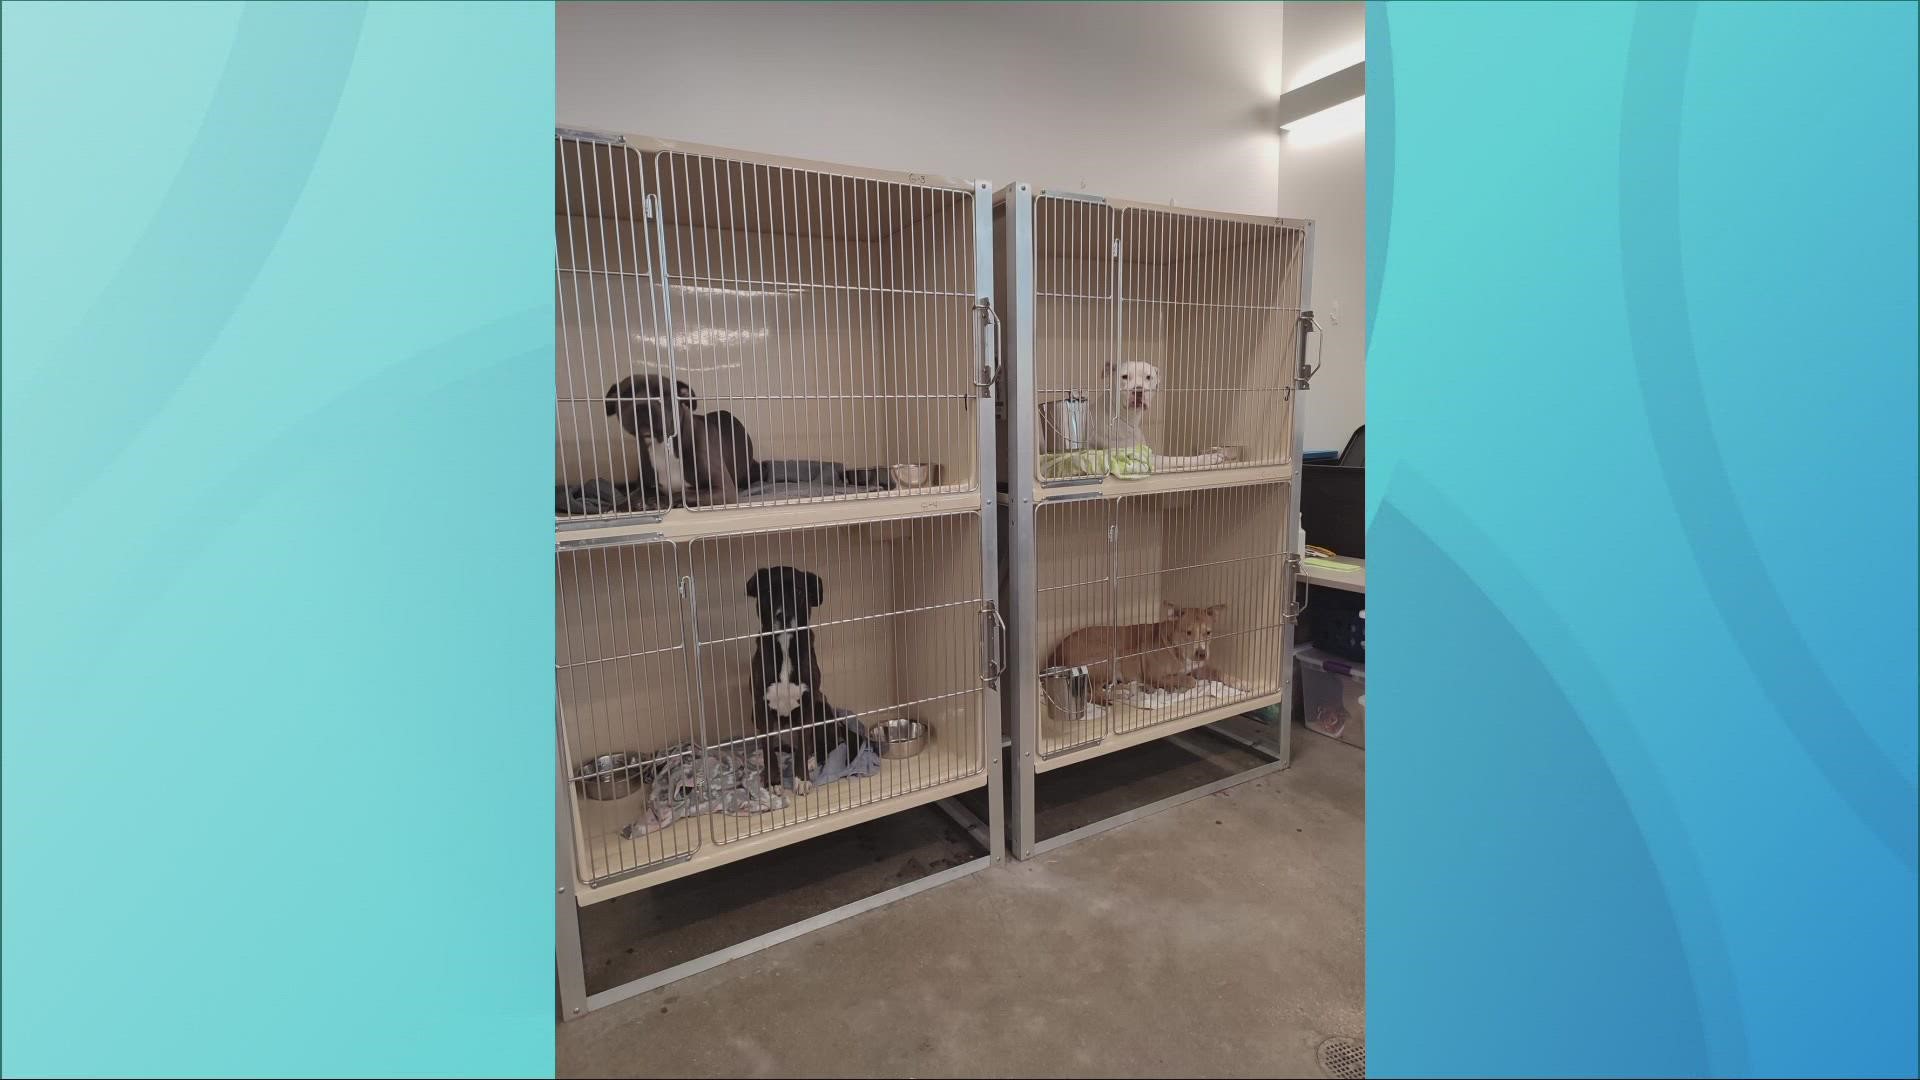 City Dogs Cleveland is lowering adoption fees after kennels have once again exceeded capacity. 3News' Laura Caso has more.